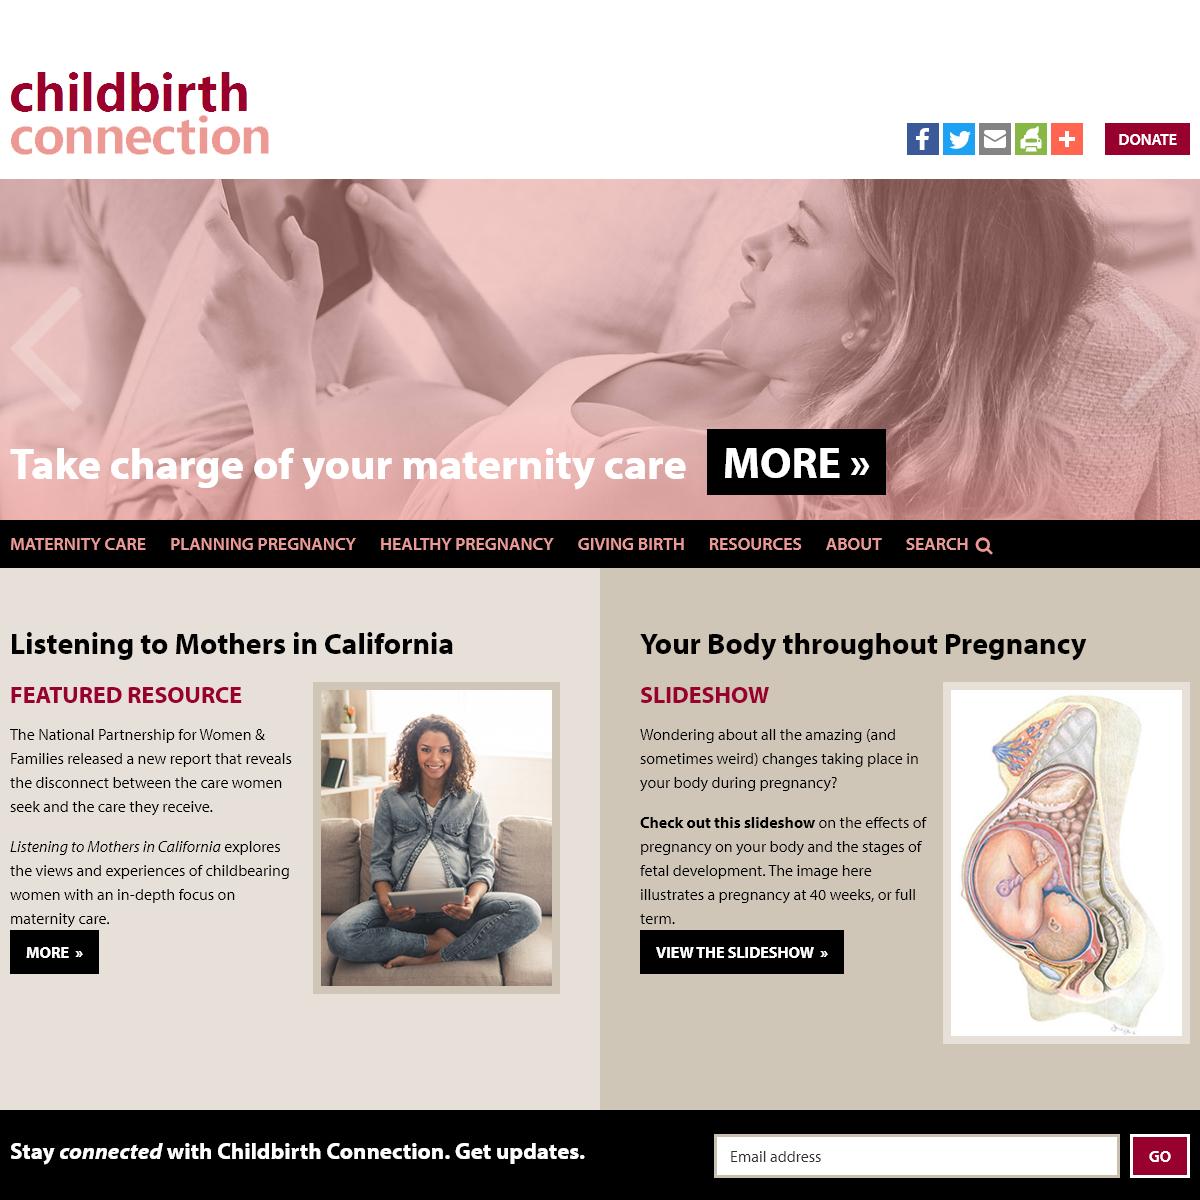 A complete backup of childbirthconnection.org